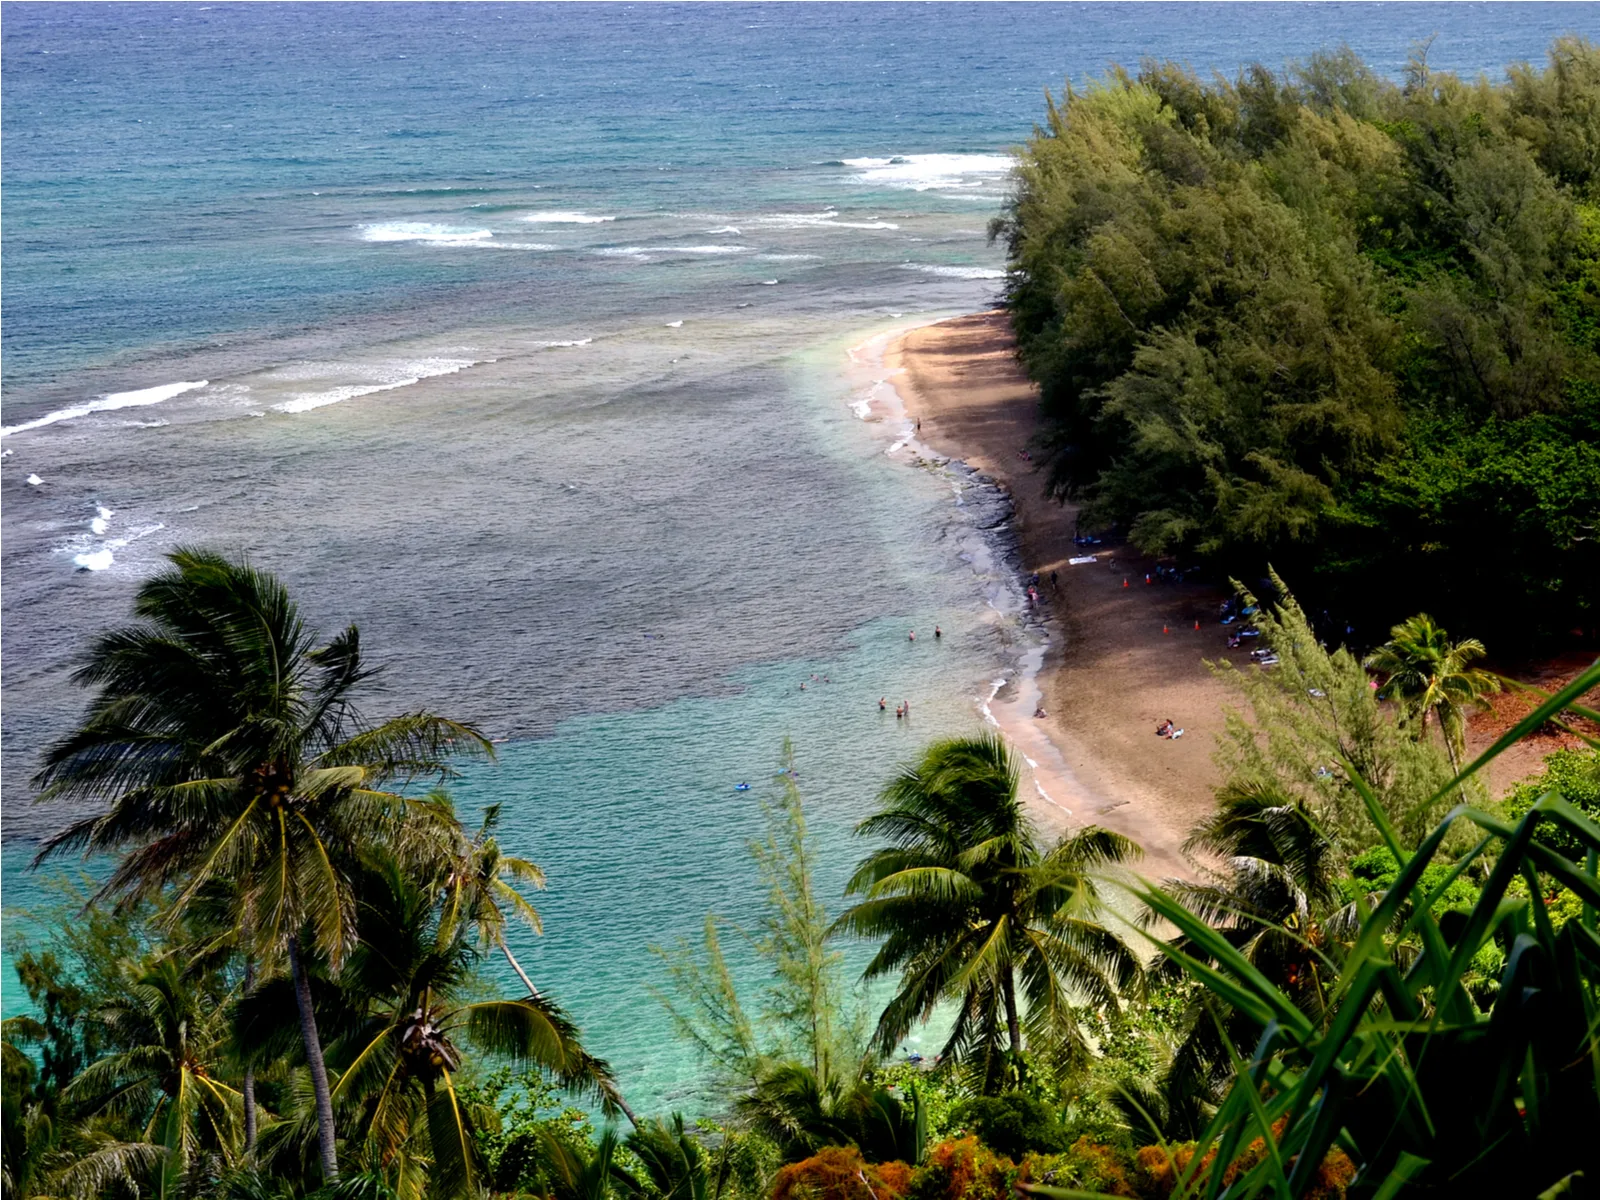 Aerial view on one of the best snorkeling spots in Hawaii, Ke’e Beach where few people are seen enjoying the calm shore